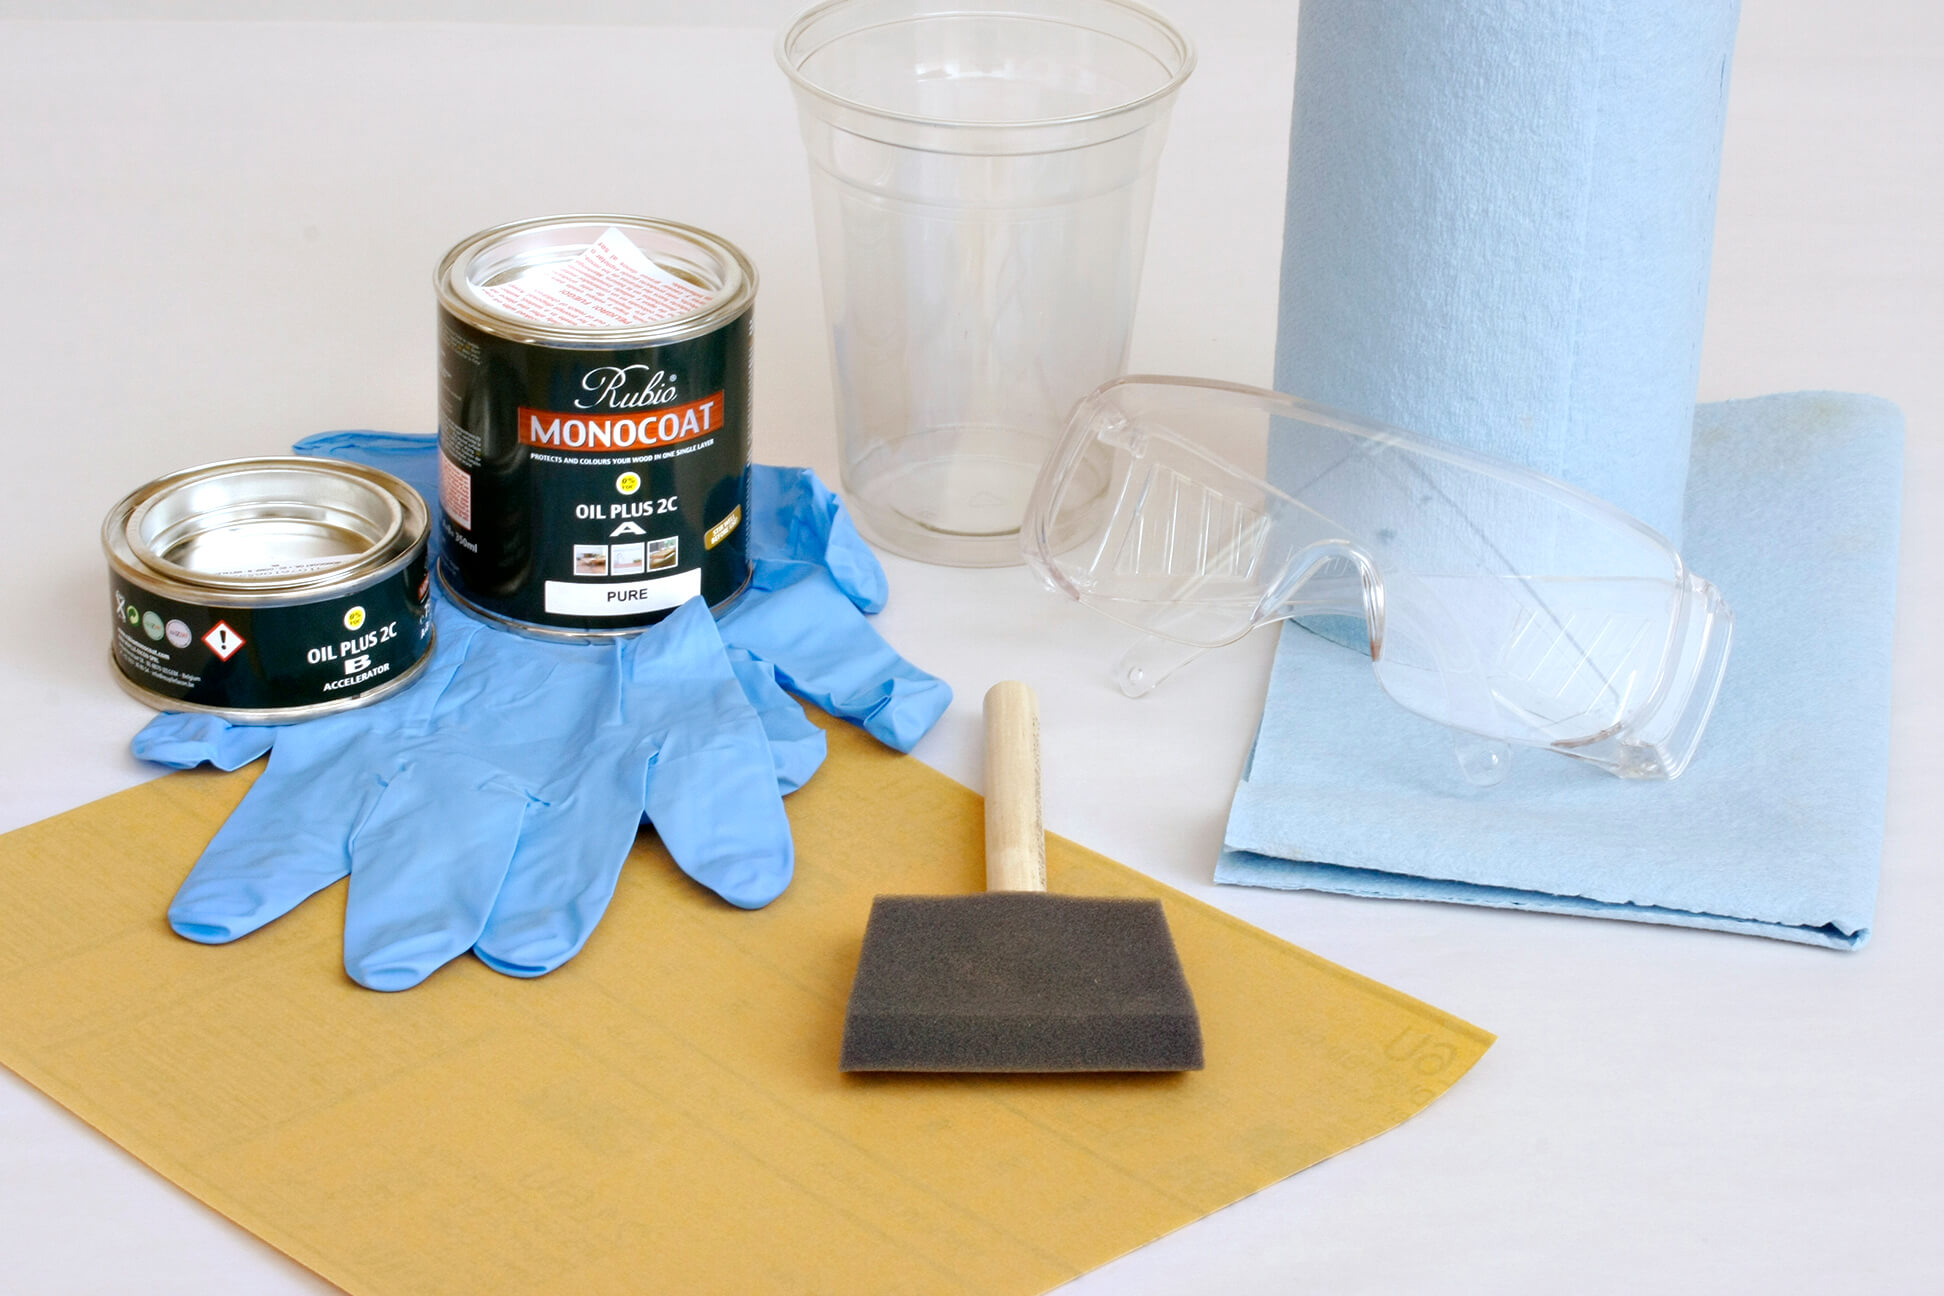 How to oil your wooden table with the Oil Plus 2C